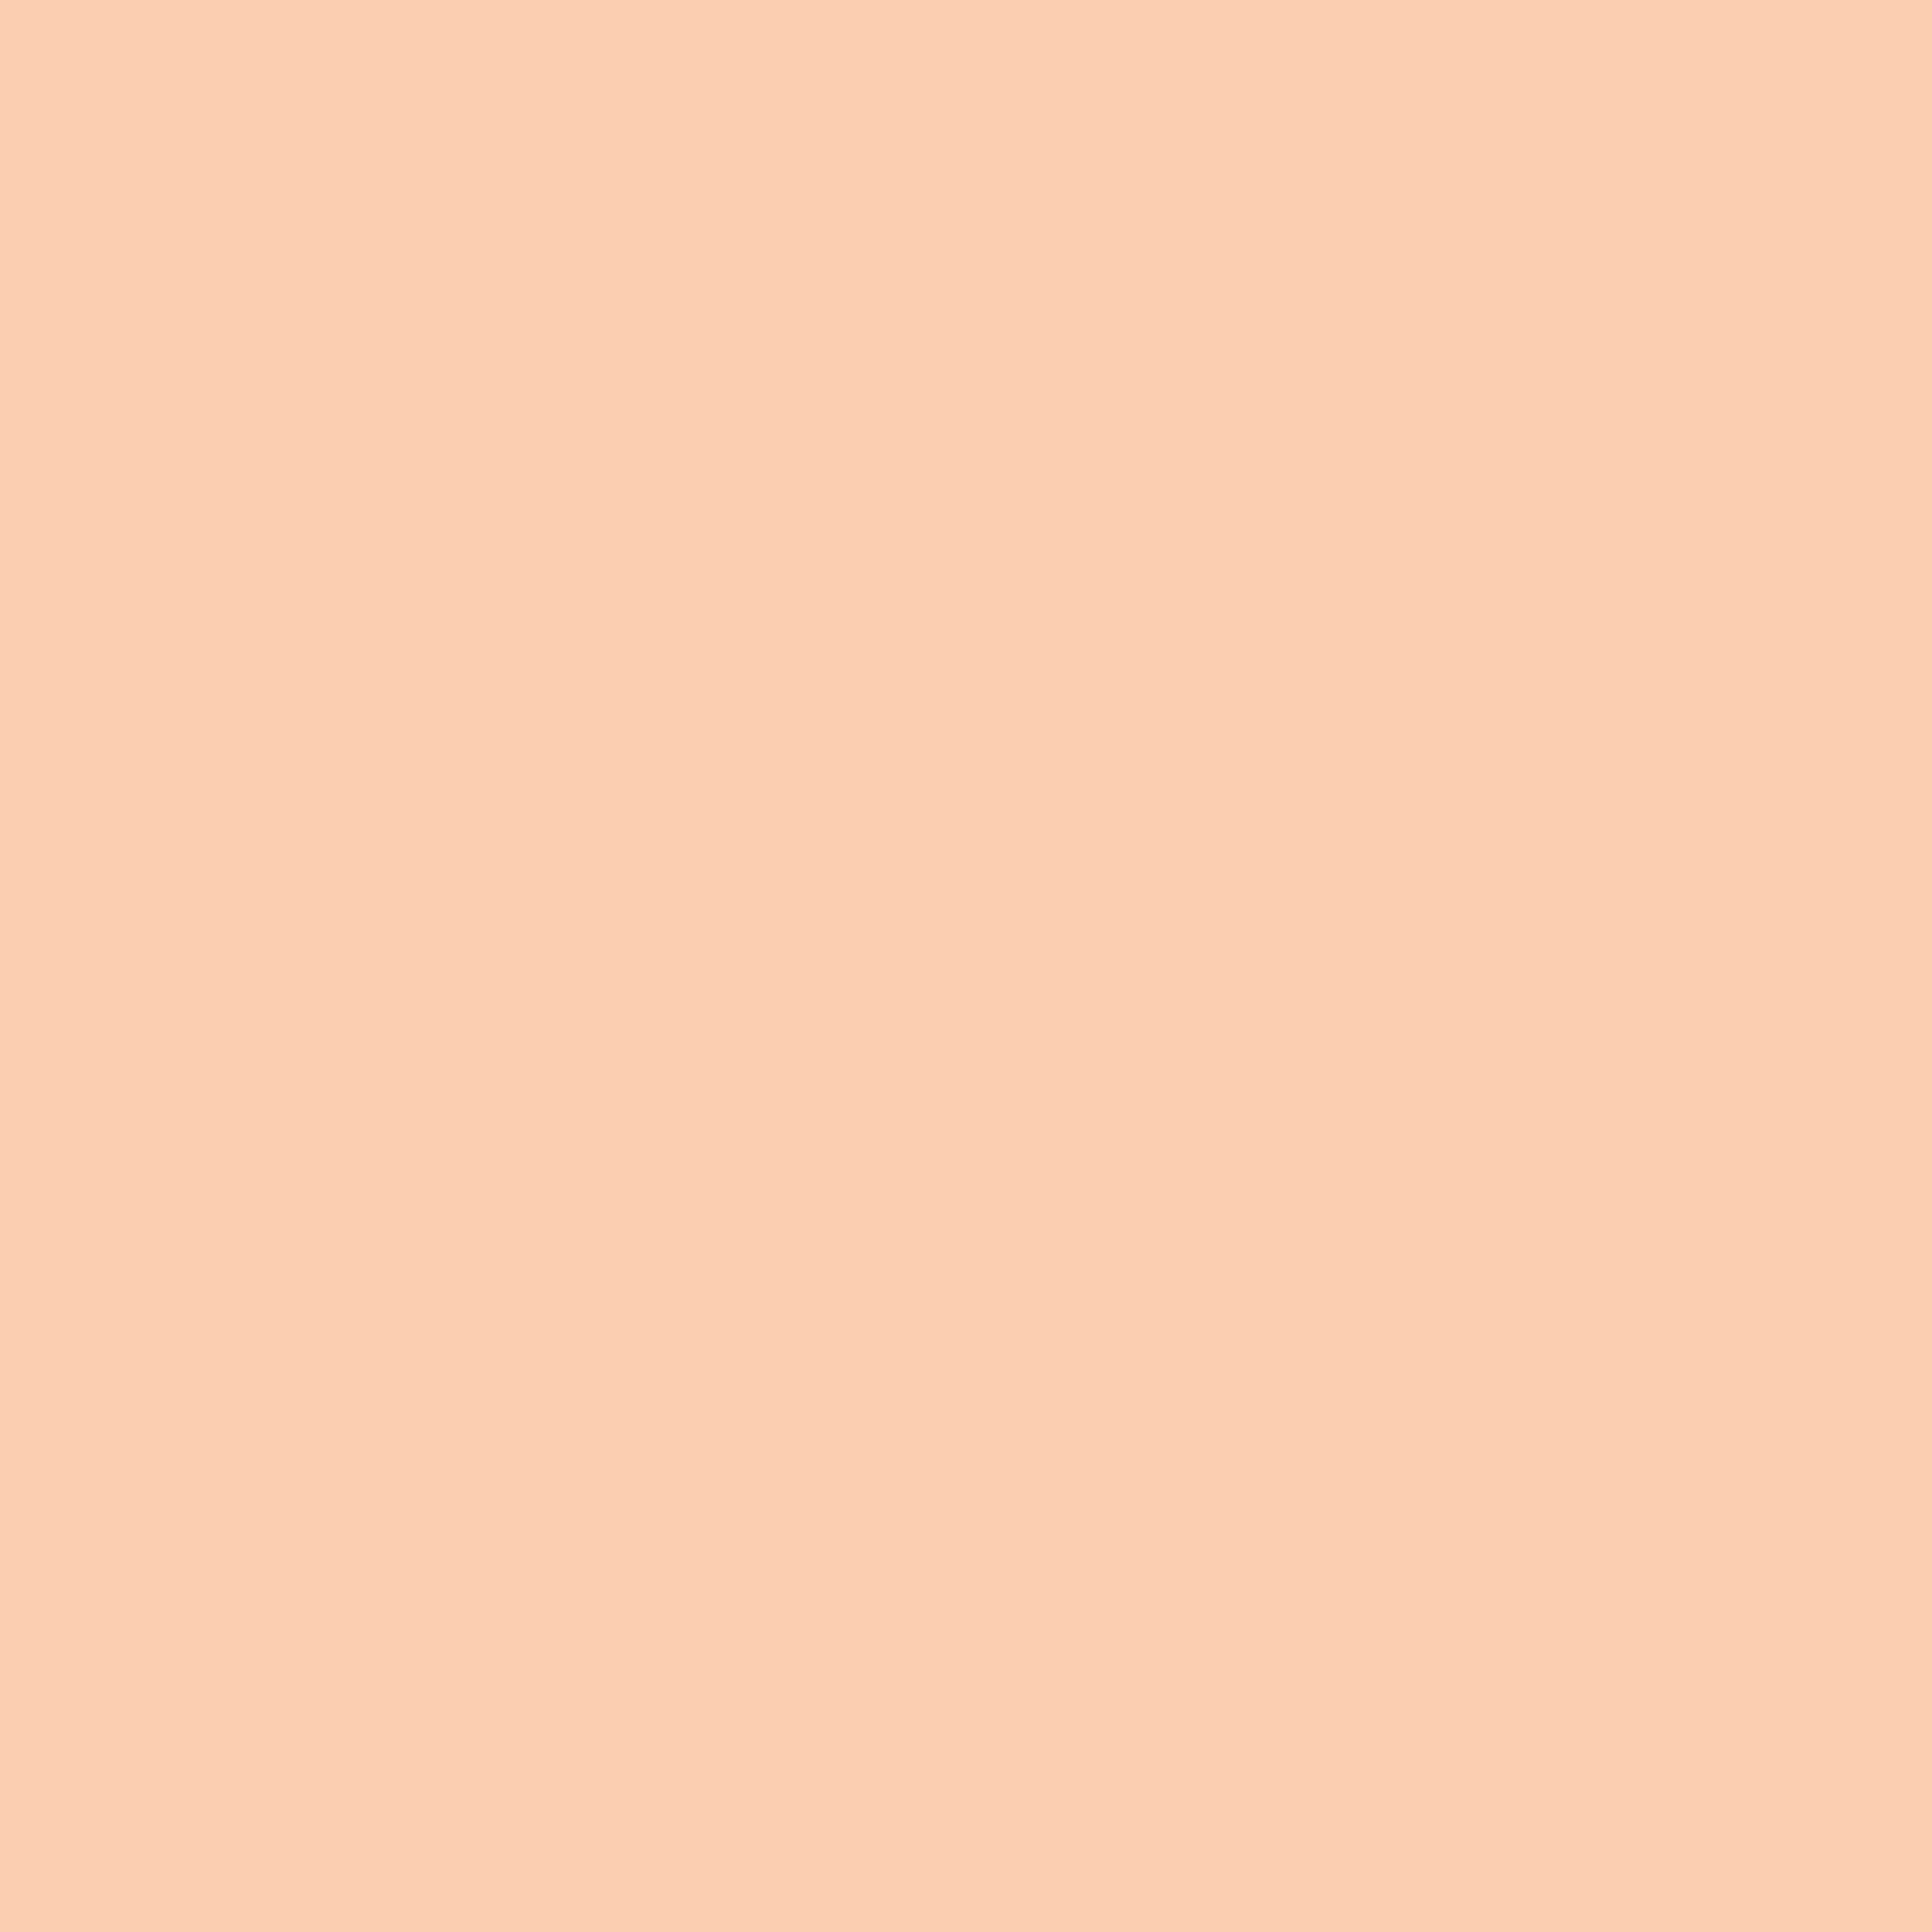 2732x2732 Apricot Solid Color Background